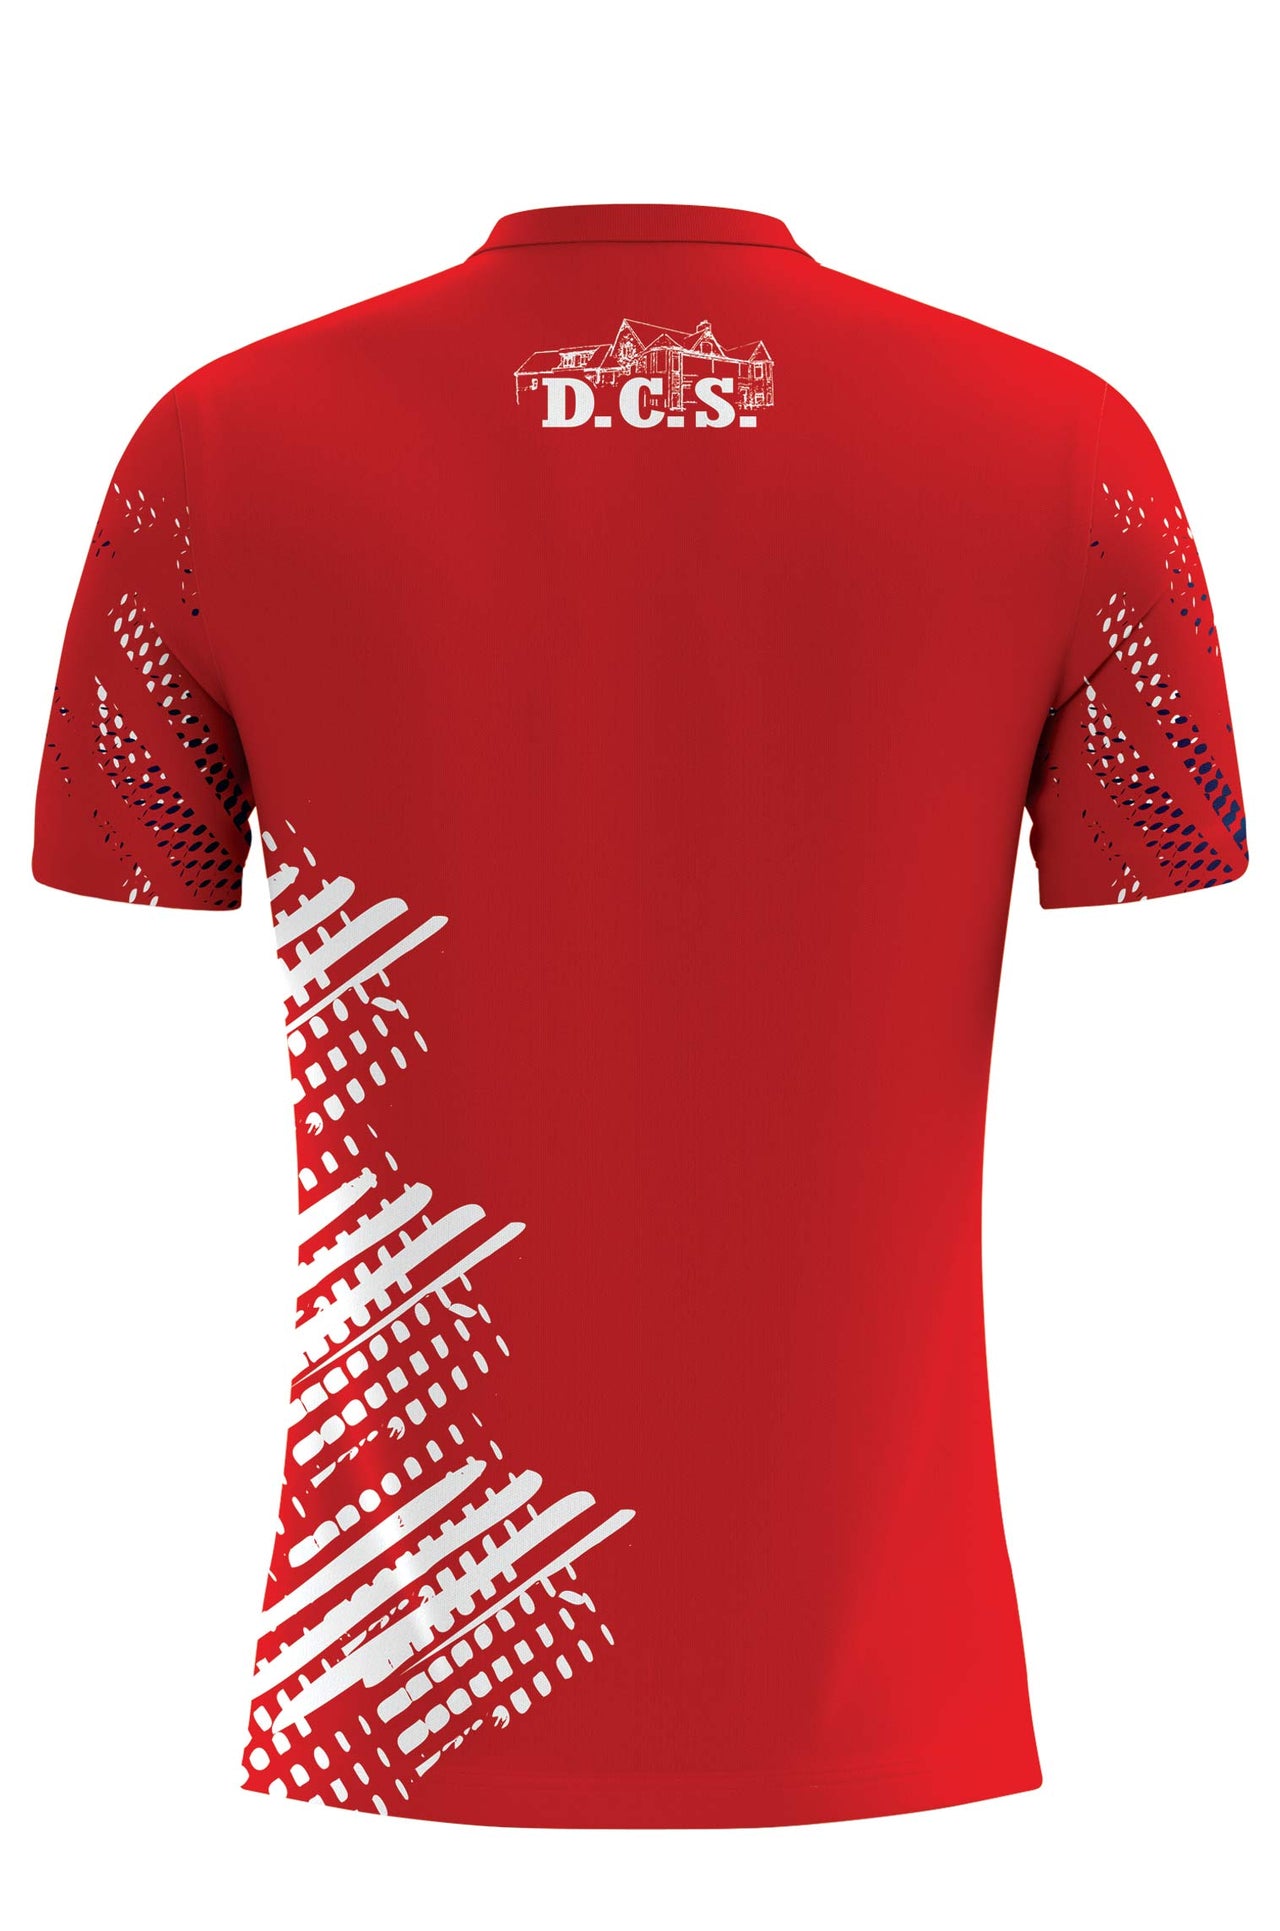 USGAA County Red Training Jersey Player Fit Adult